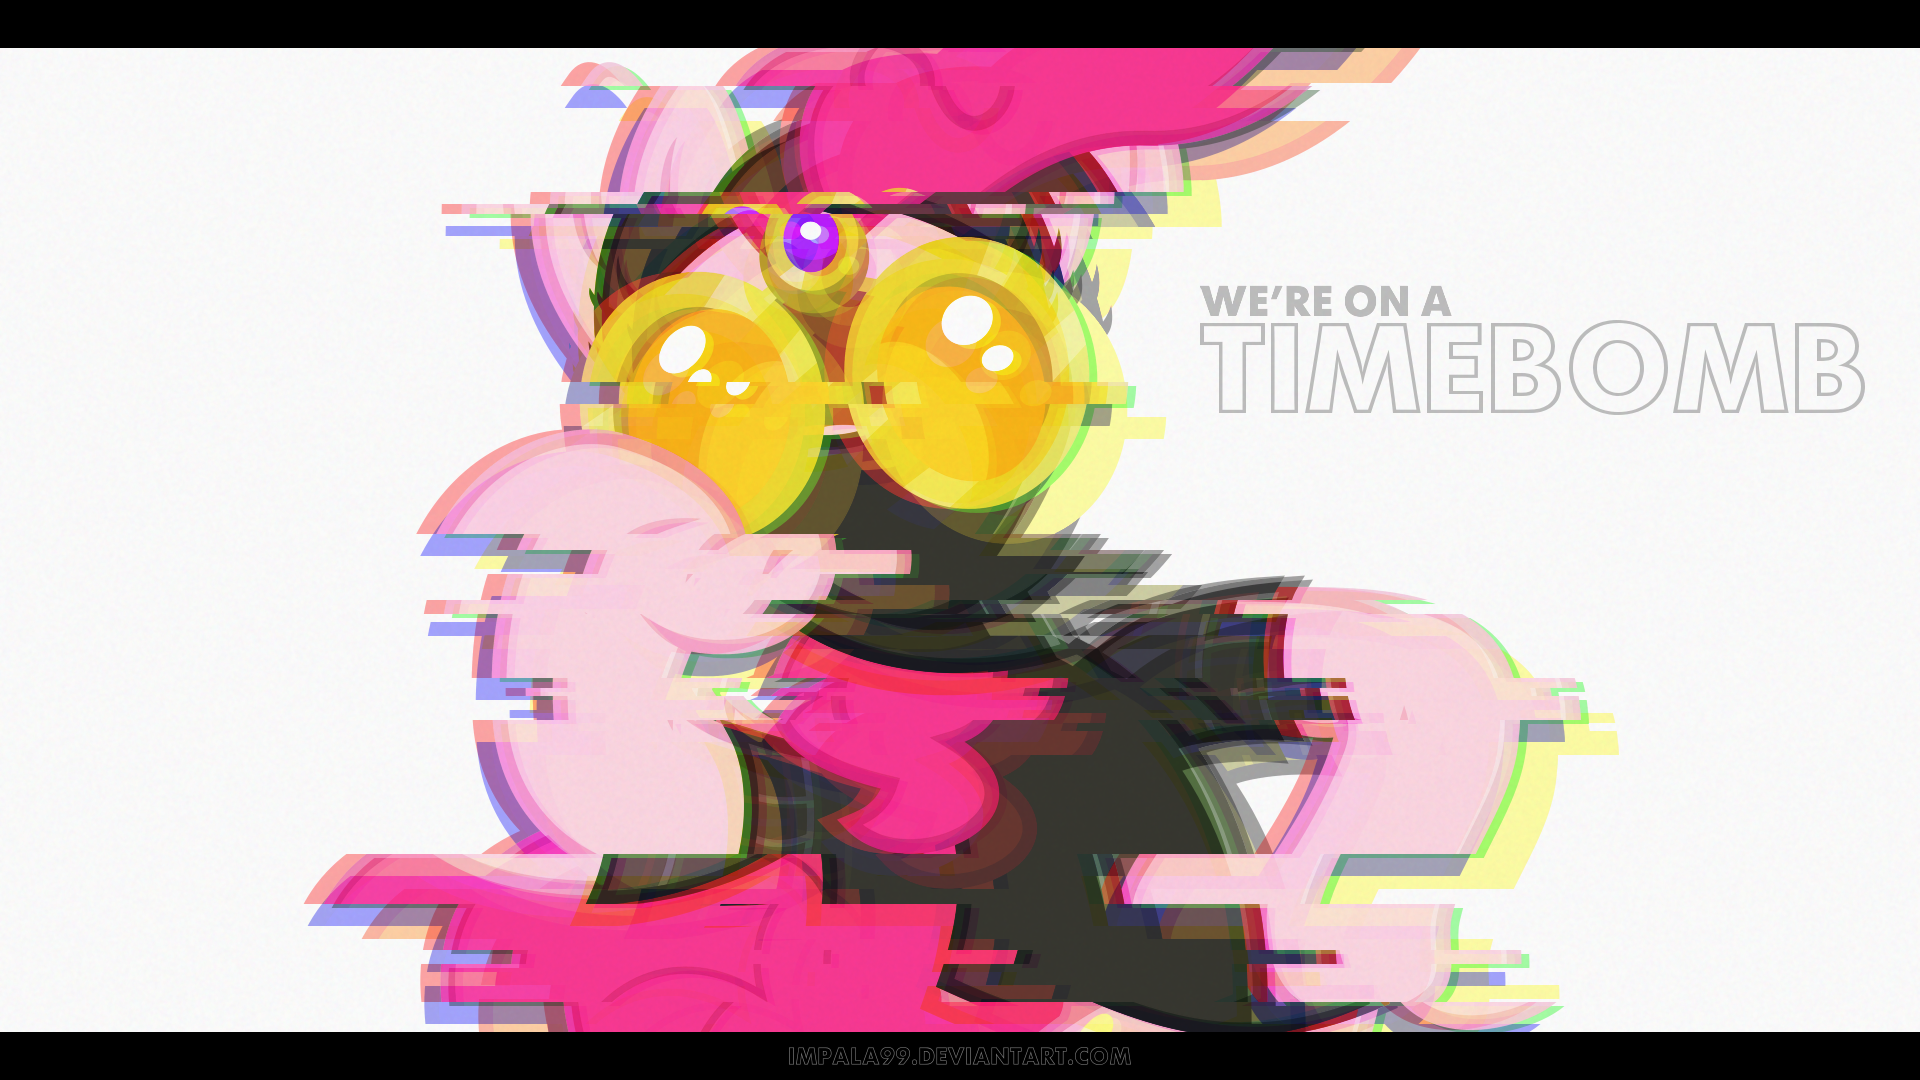 We're on a timebomb (Pinkie Pie - wallpaper) by CaNoN-lb and impala99